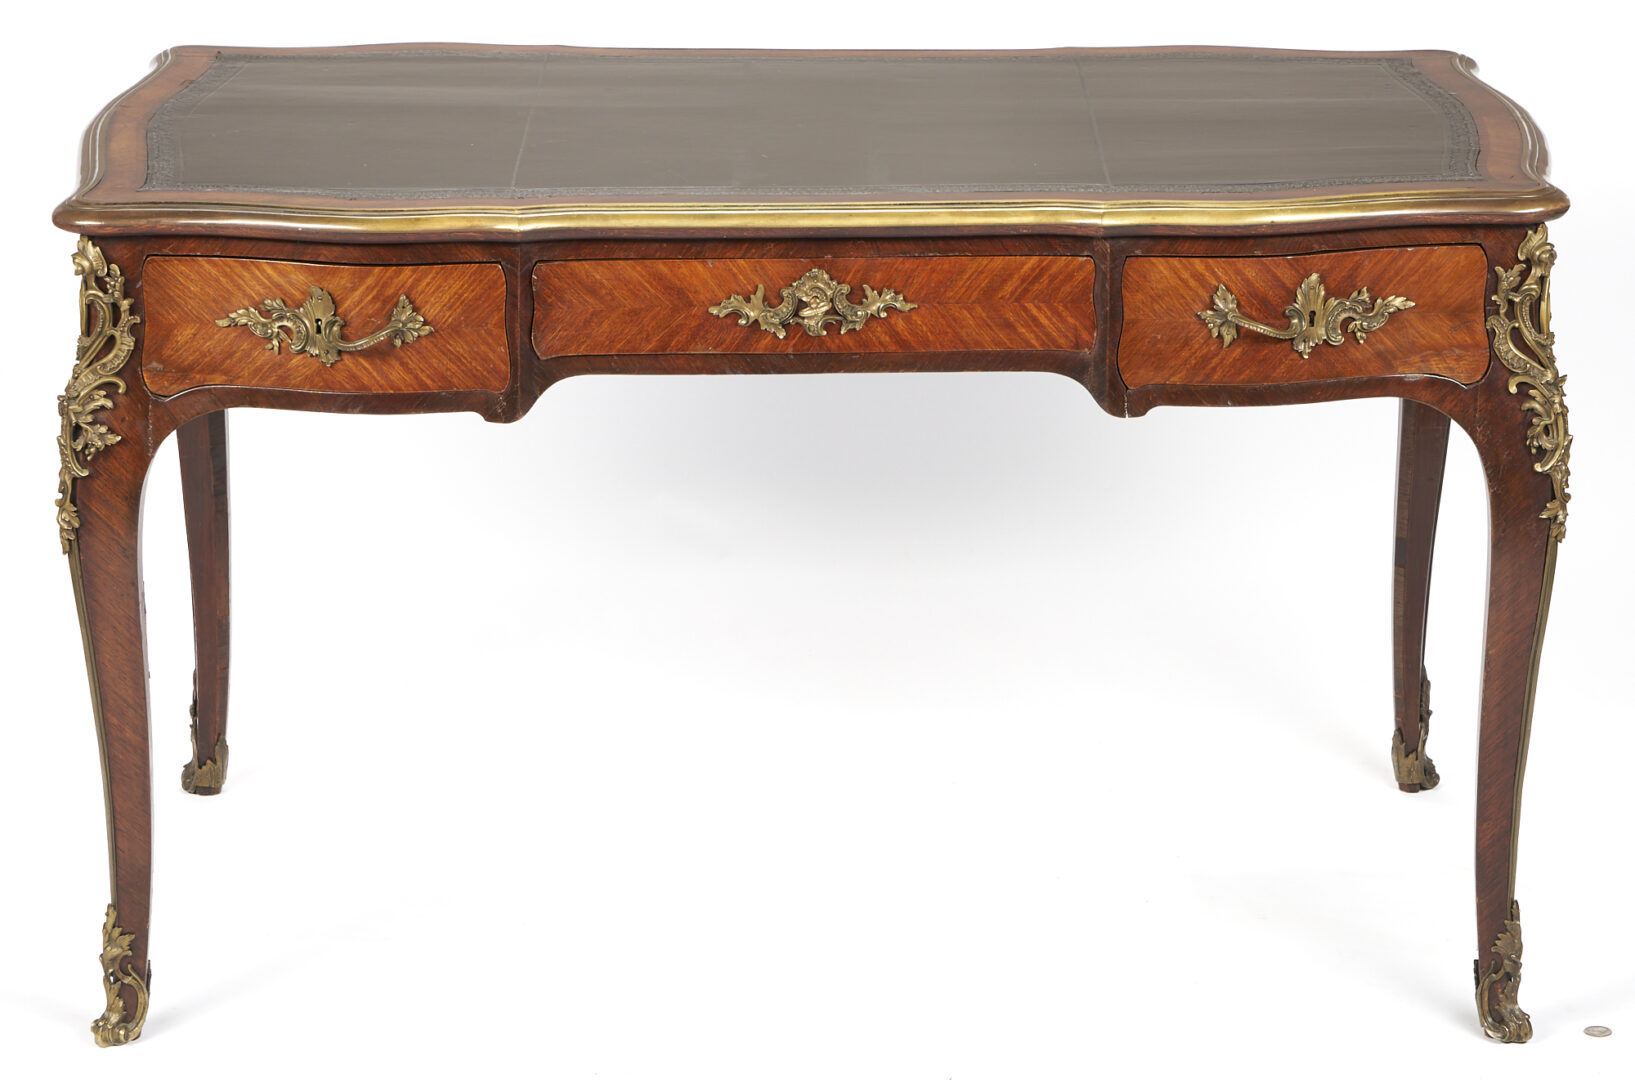 Lot 348: Louis XV Style Gilt Bronze Mounted Writing Table or Desk